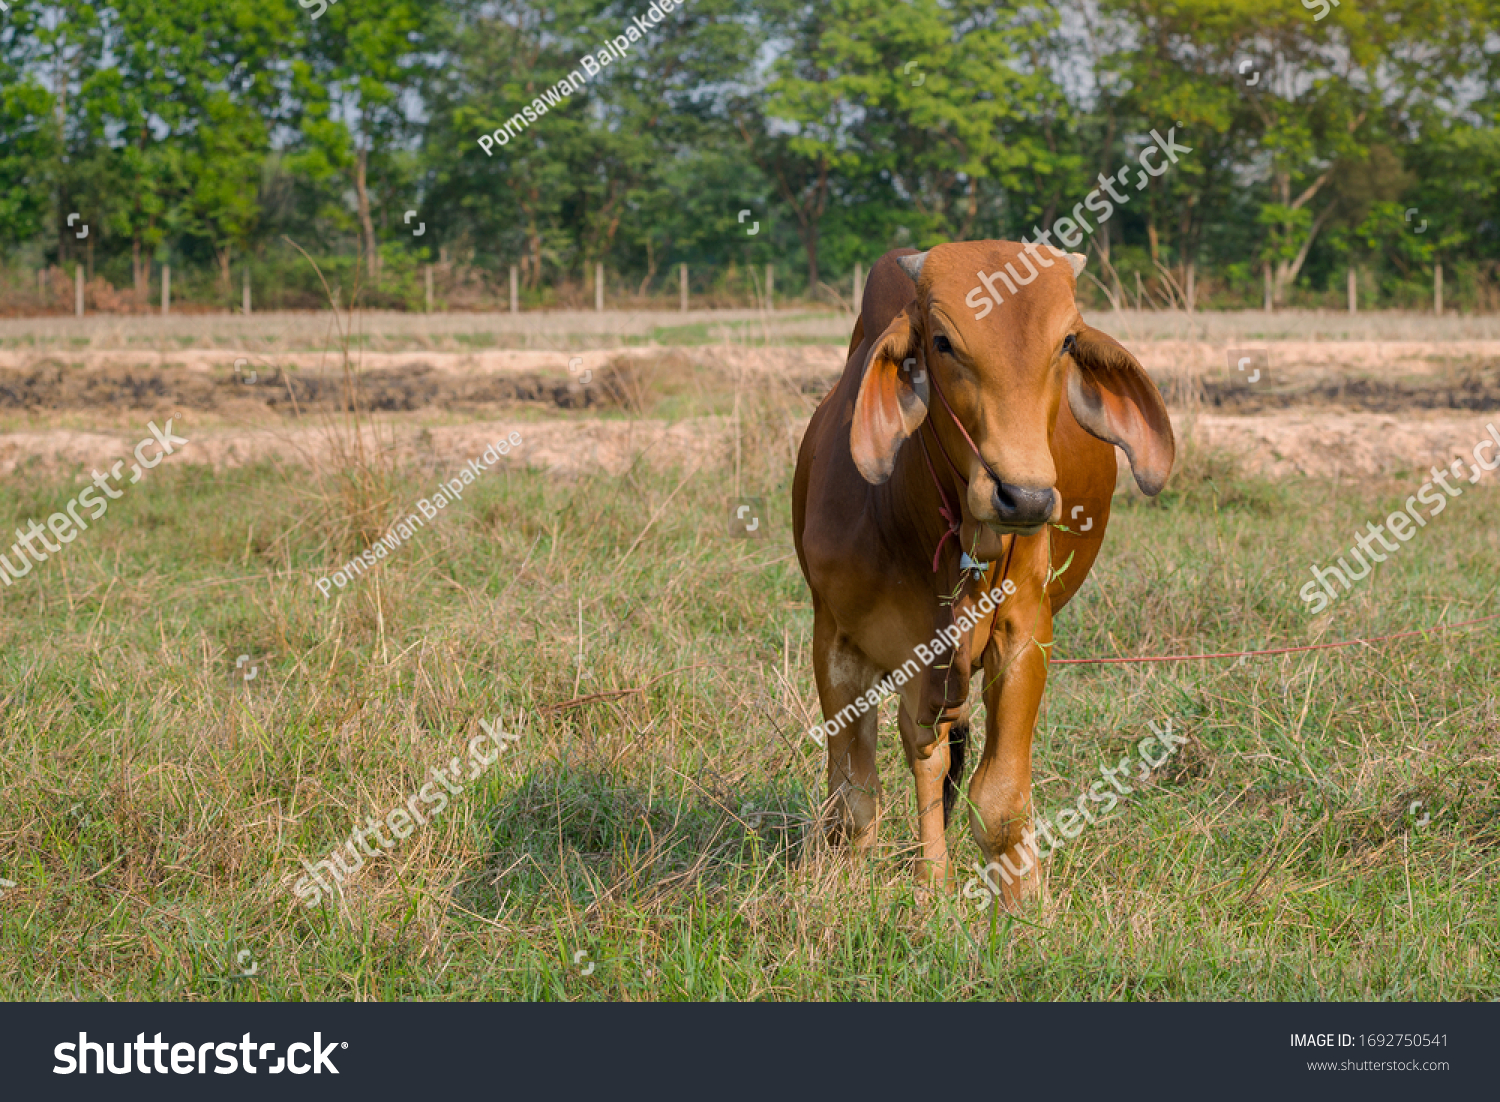 Cows standing in the rice field Thailand. #1692750541